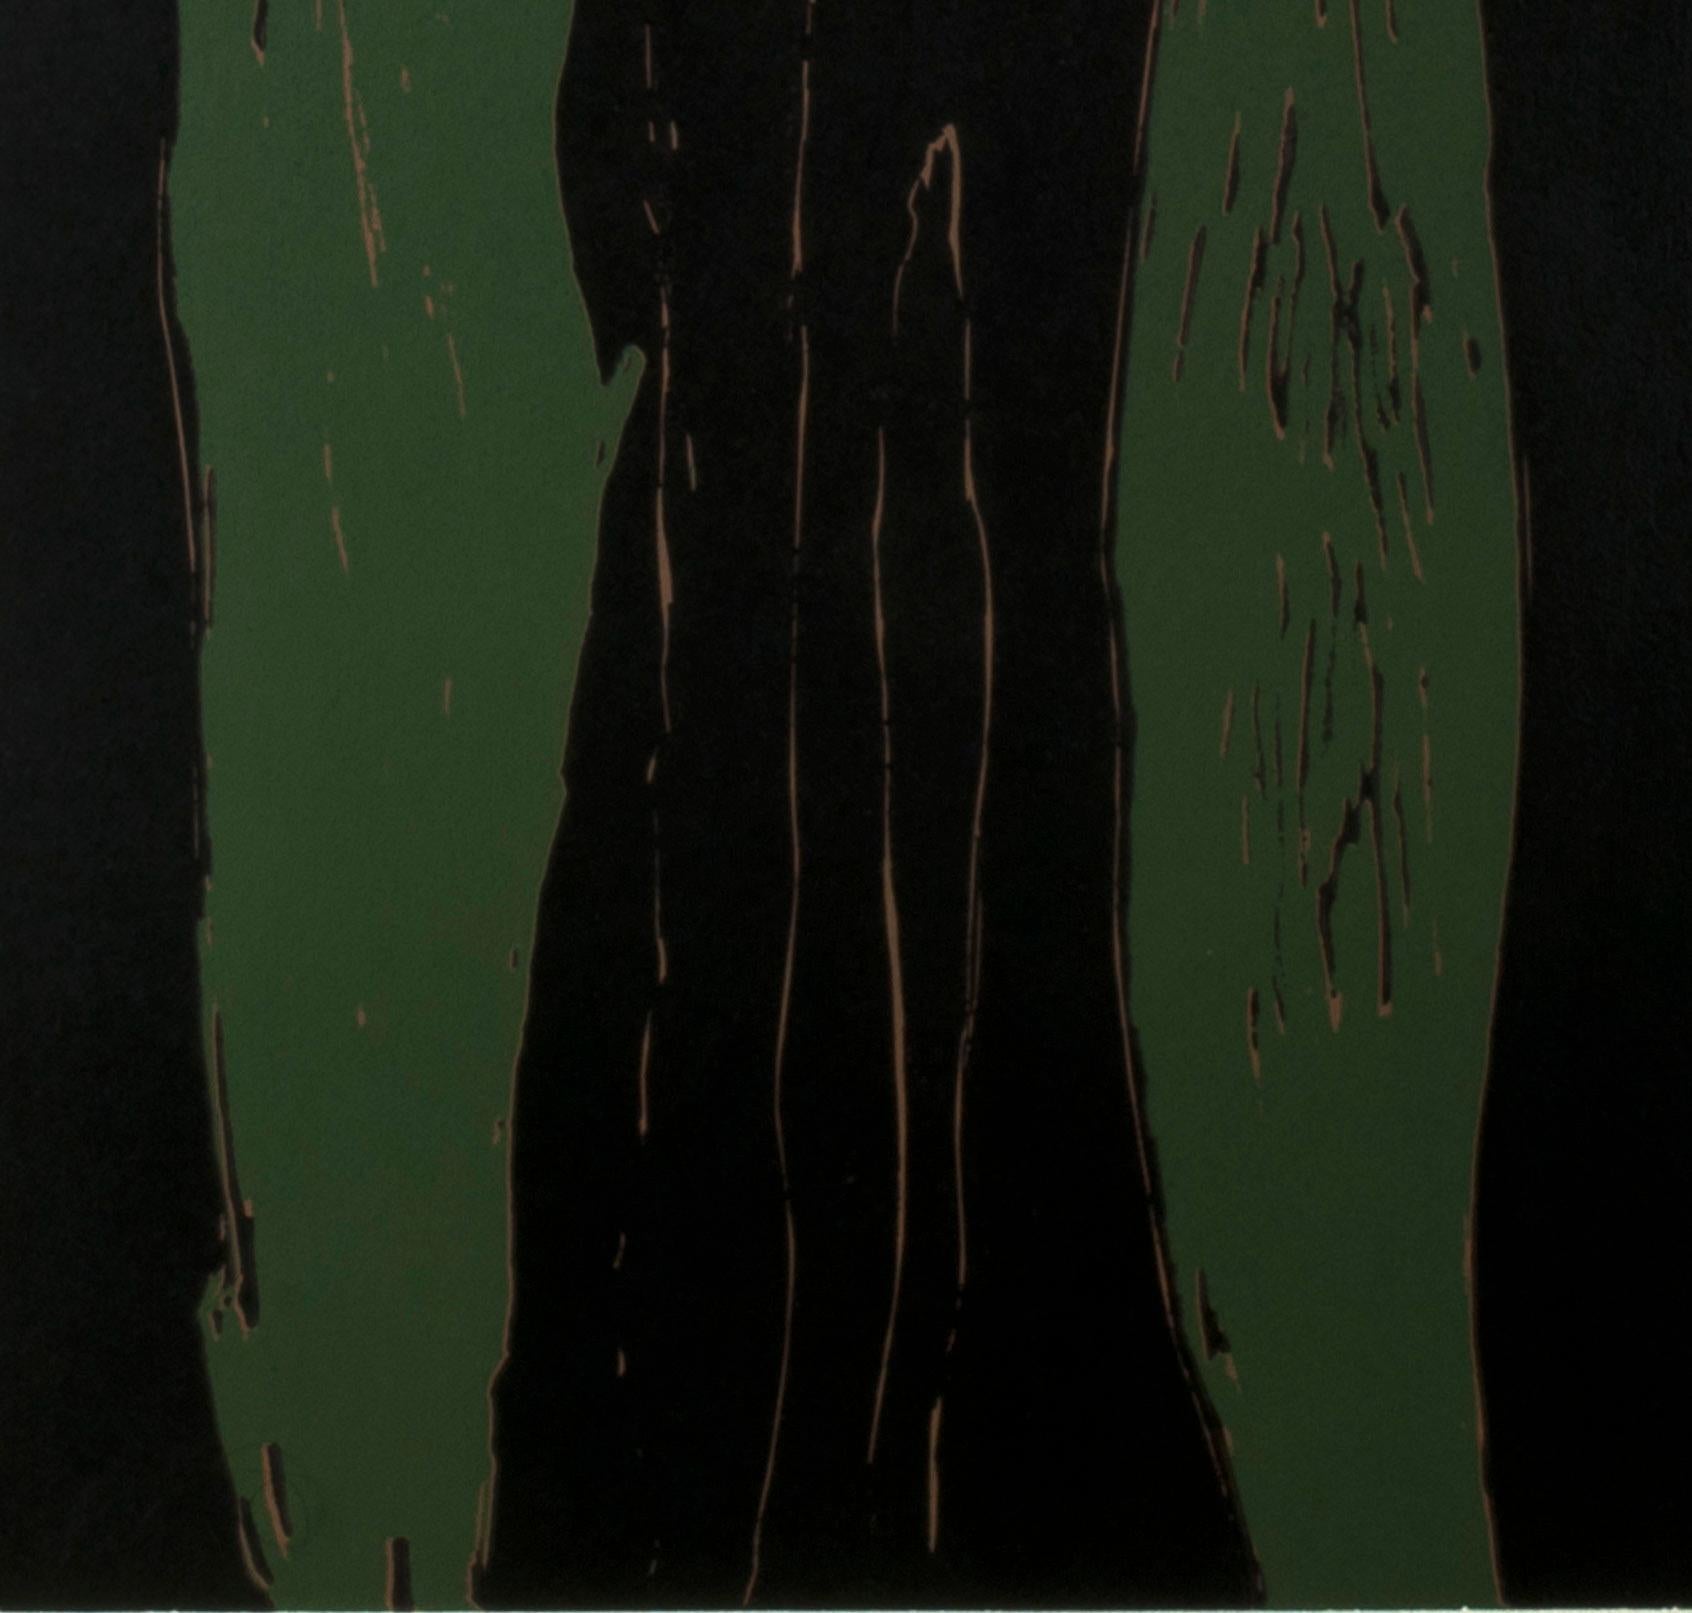 Cypresses
Reductive color woodcut in colors, black, green & brown, 1982
Unsigned
From: Tramp Picture series
